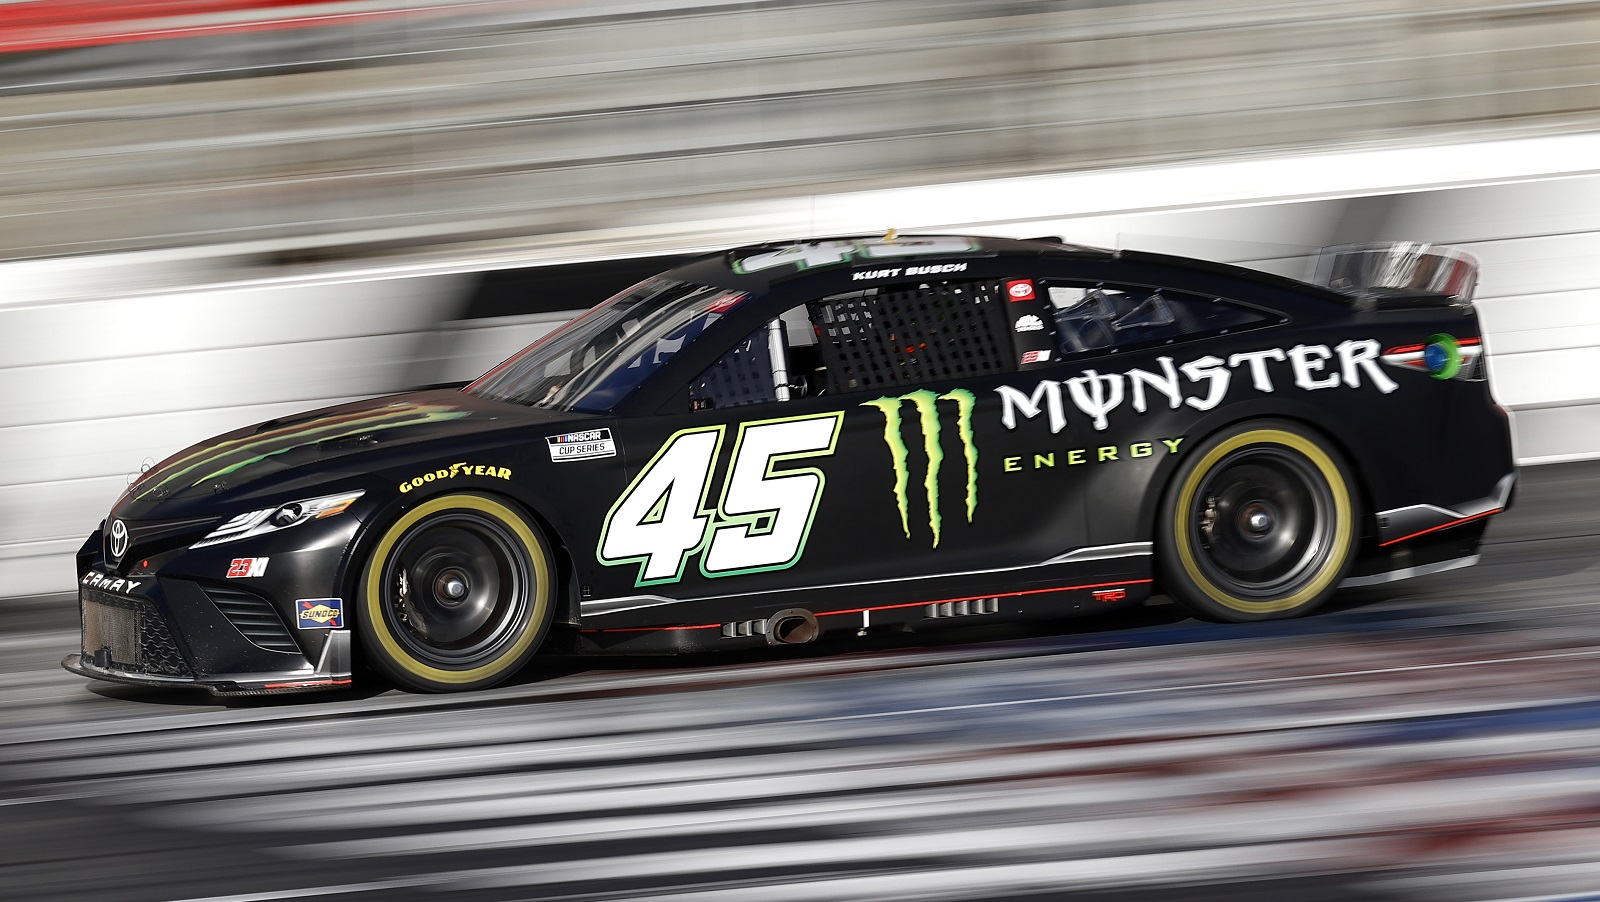 Kurt Busch drives the No. 45 Toyota during the NASCAR Next Gen test at Charlotte Motor Speedway on Dec. 17, 2021, in Concord, North Carolina. | Jared C. Tilton/Getty Images